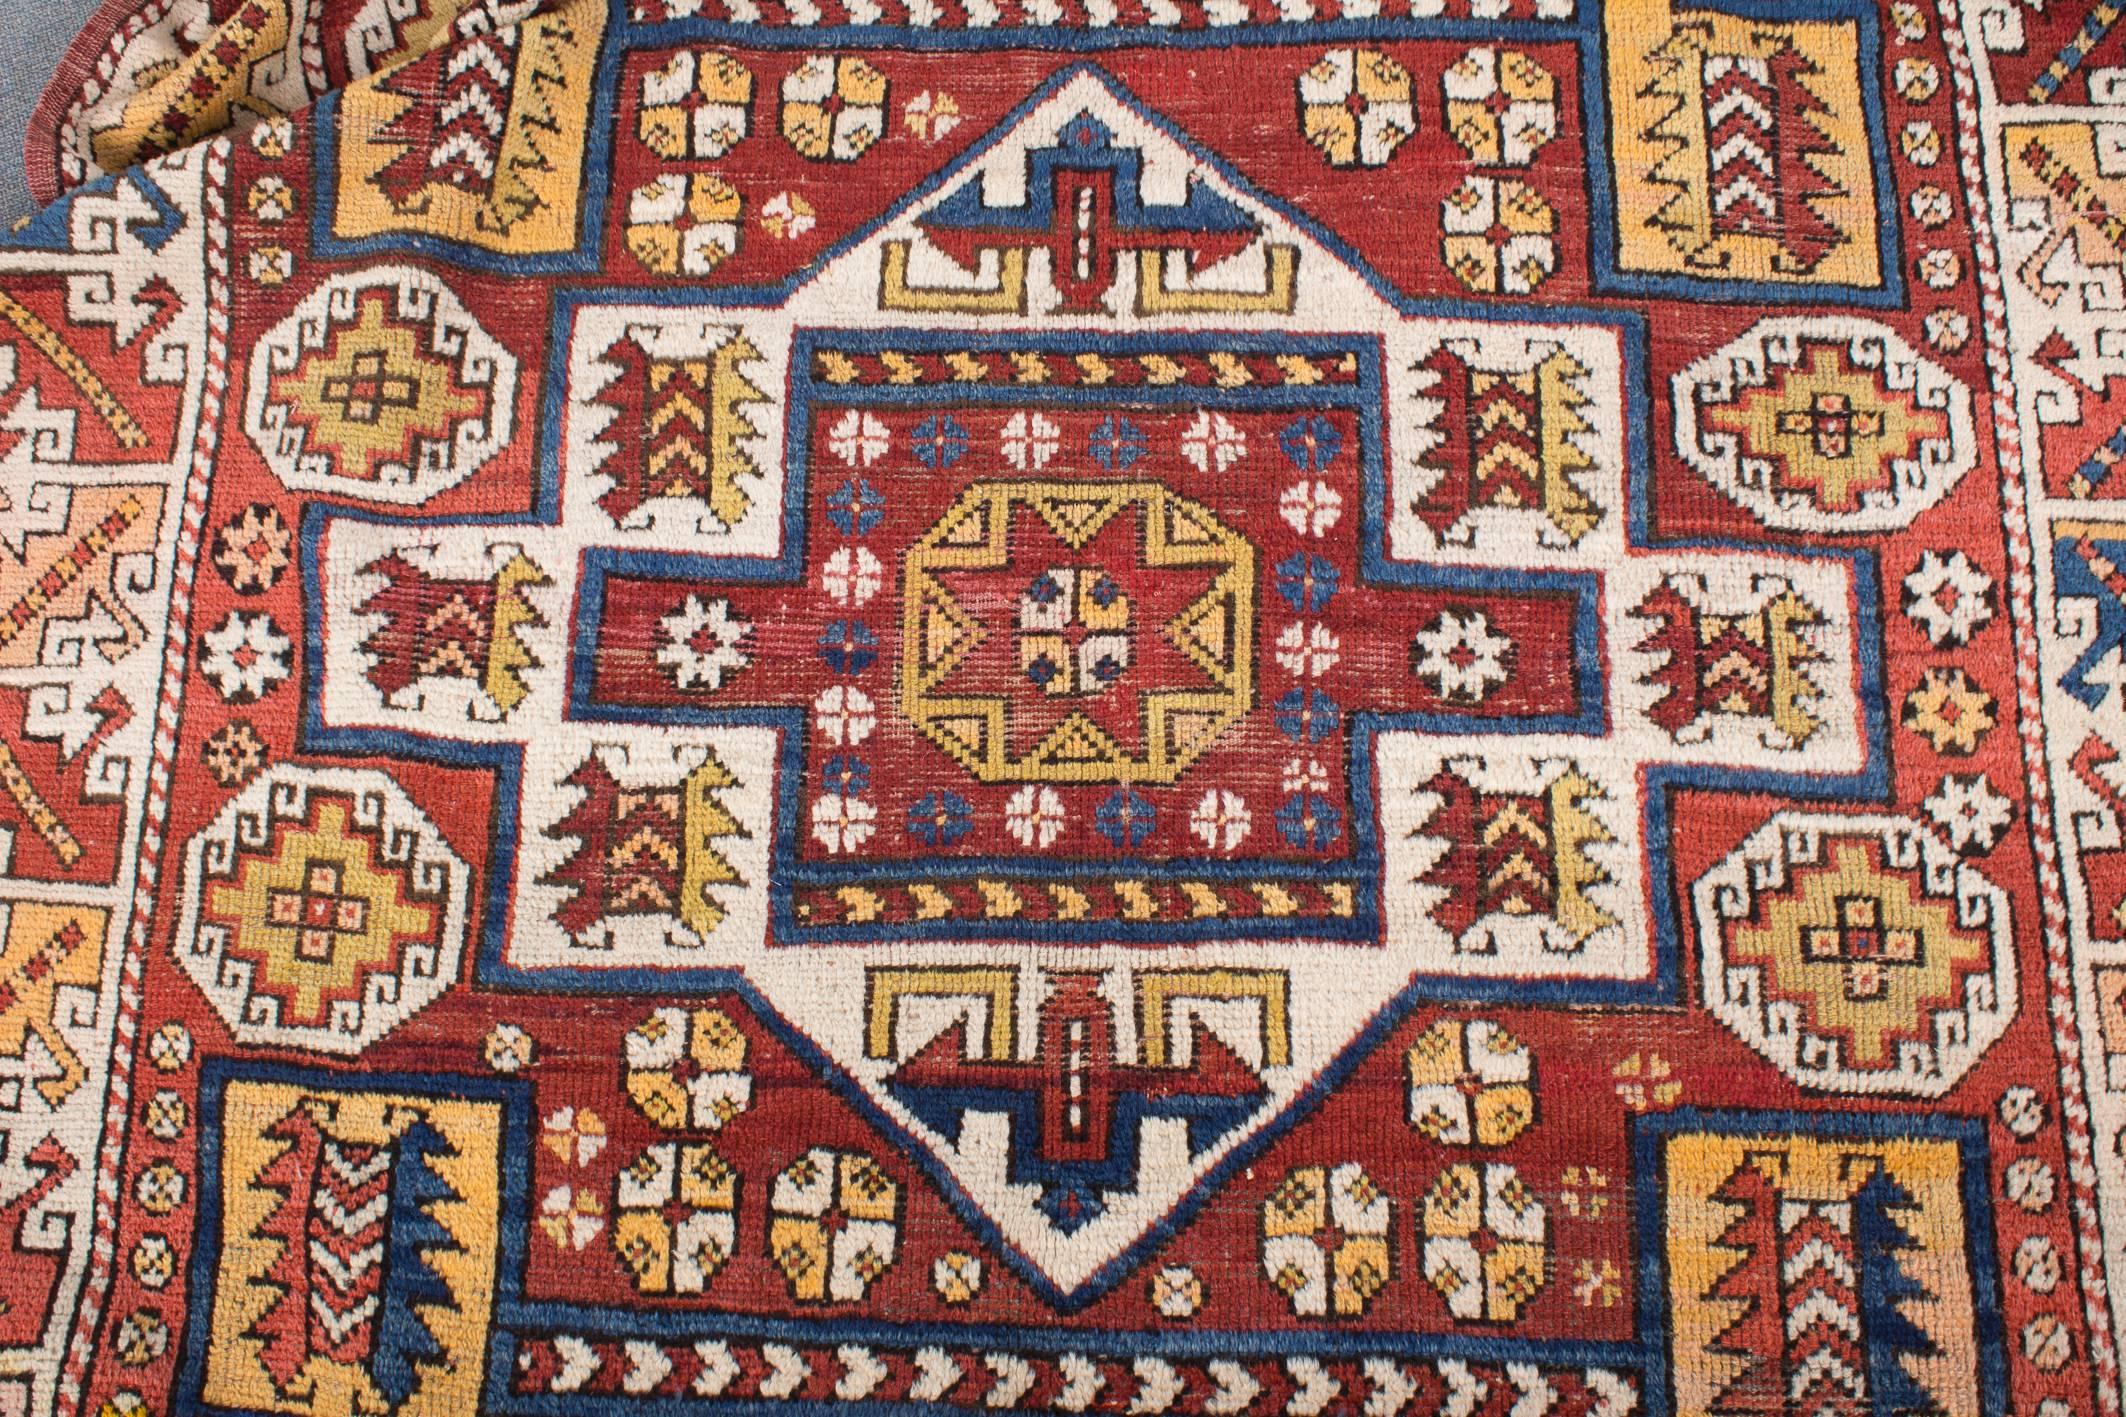 An unmistakable large and beautiful Bergama rug from the end of 19th century in his classical colors and structure with its white-ground border and midfield, typical for this region. Completely preserved piece with both original kilim